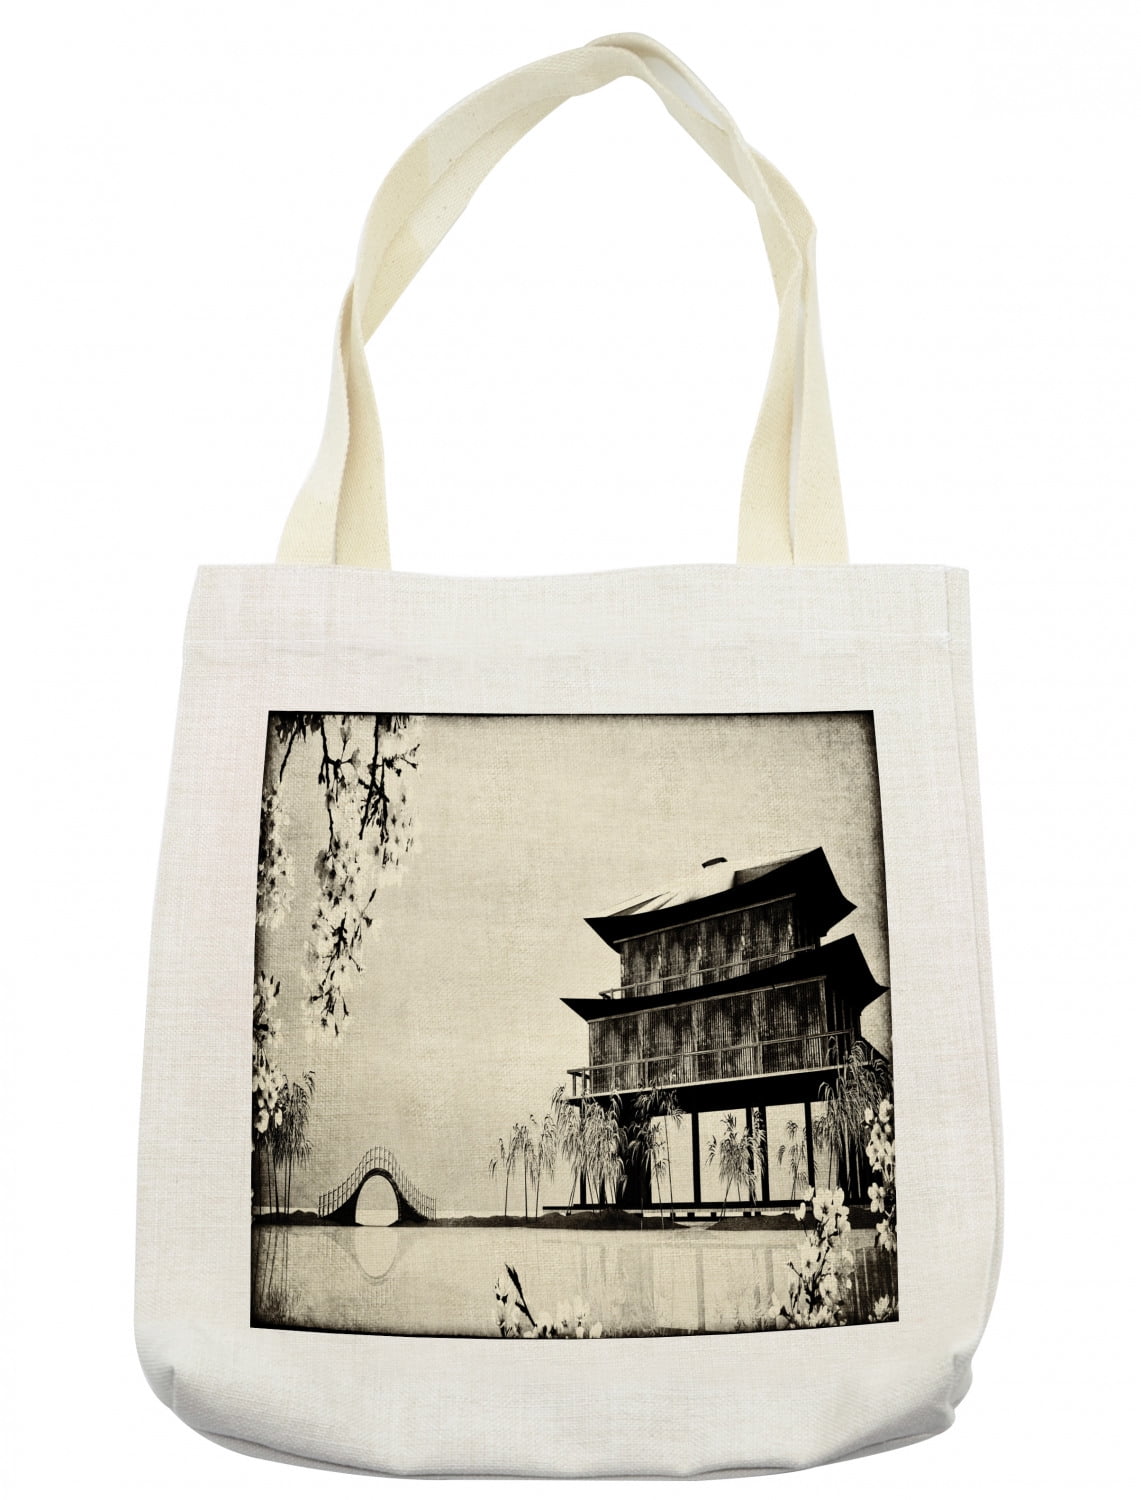 Japanese Tote Bag, Ink Painting Style Landscape of Far Eastern Country ...